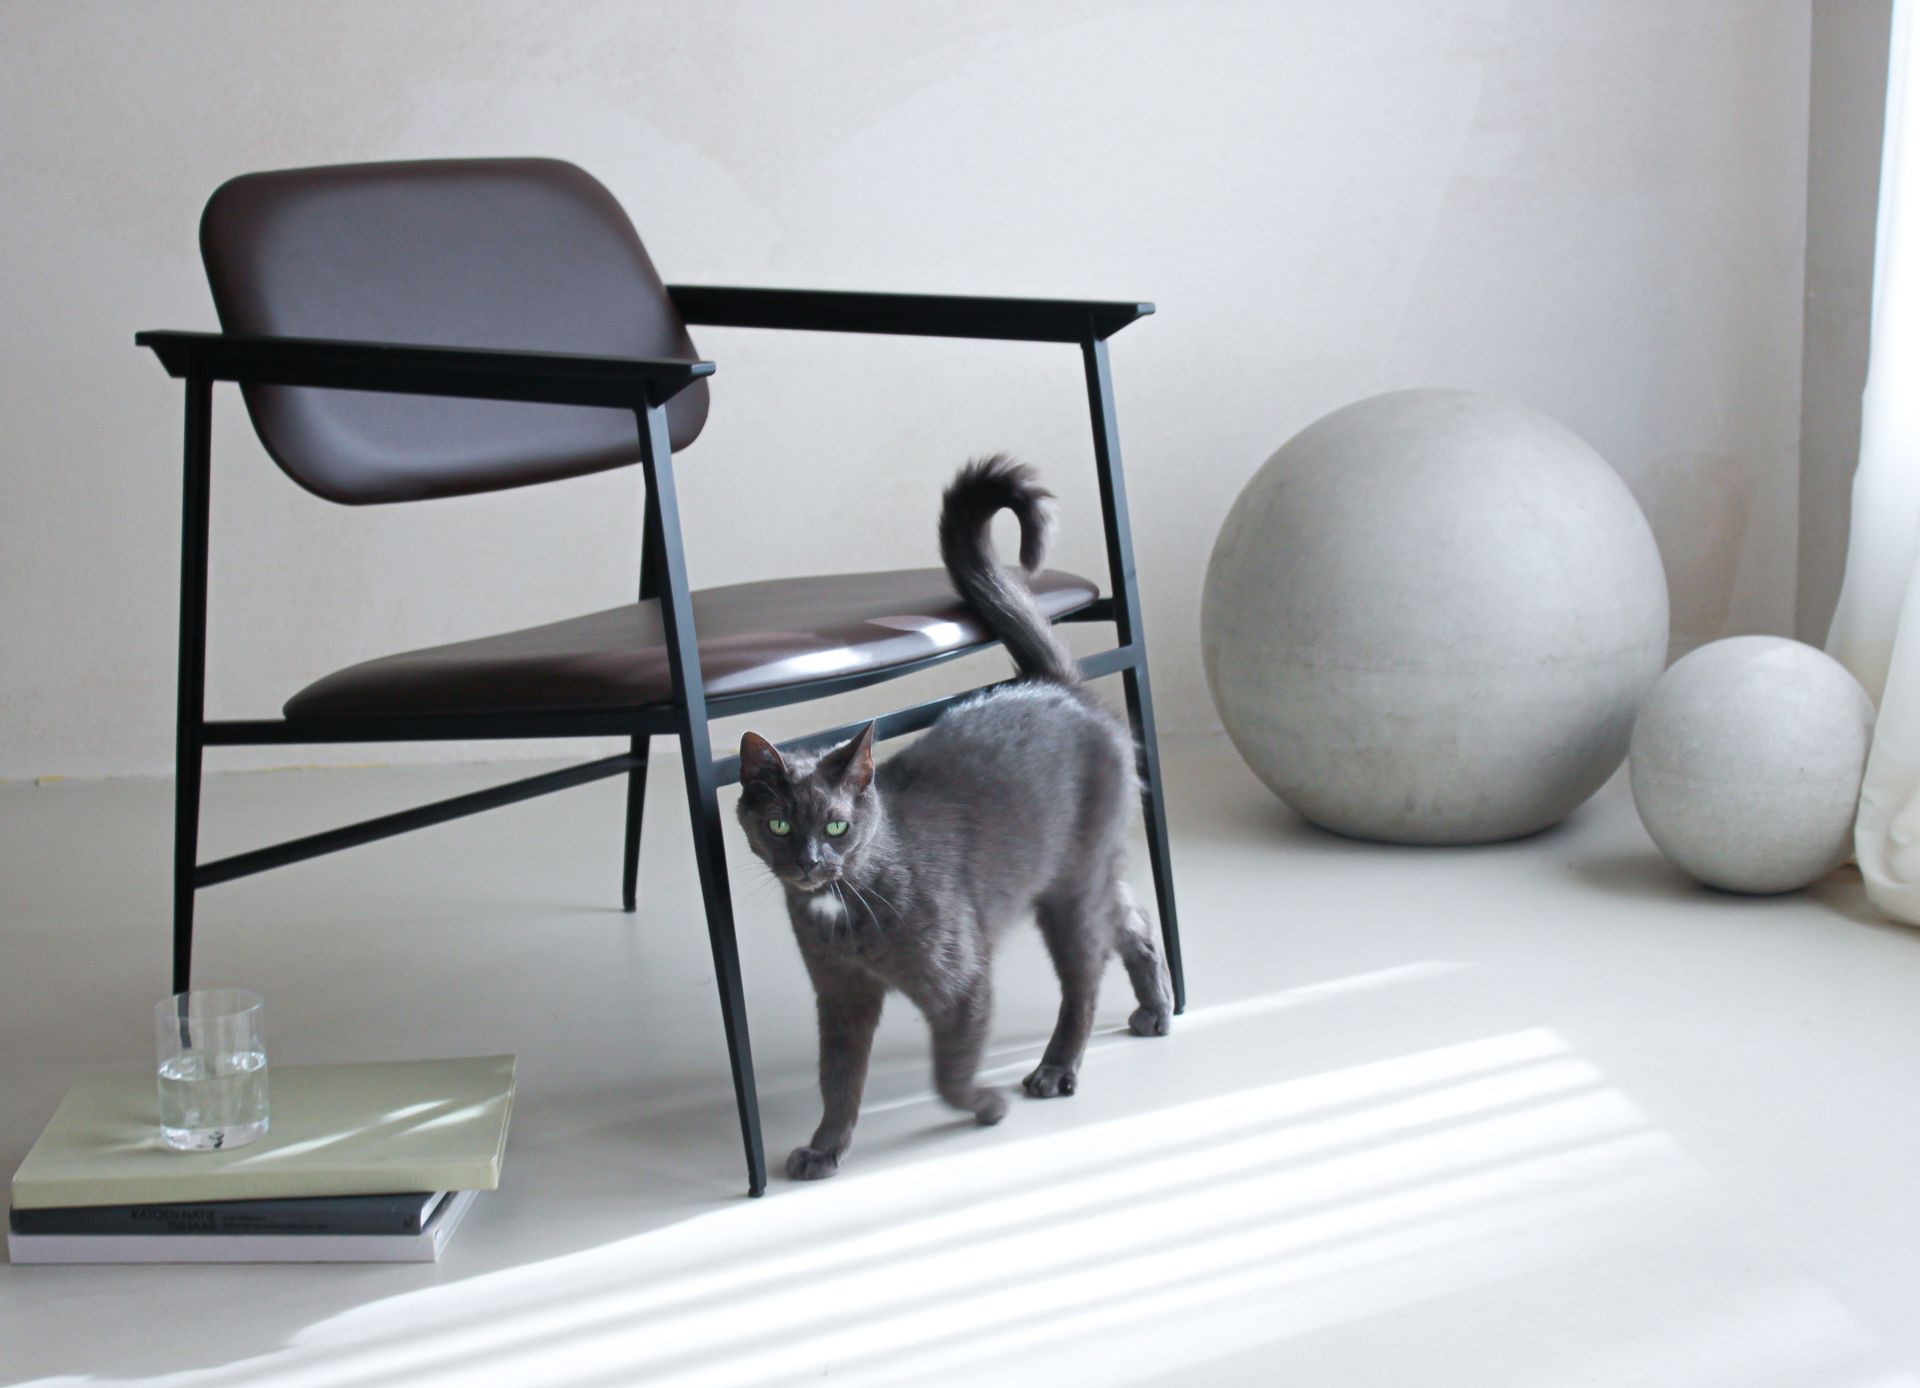 Live Light | Sofie Noyen's home featuring the DC lounge chair